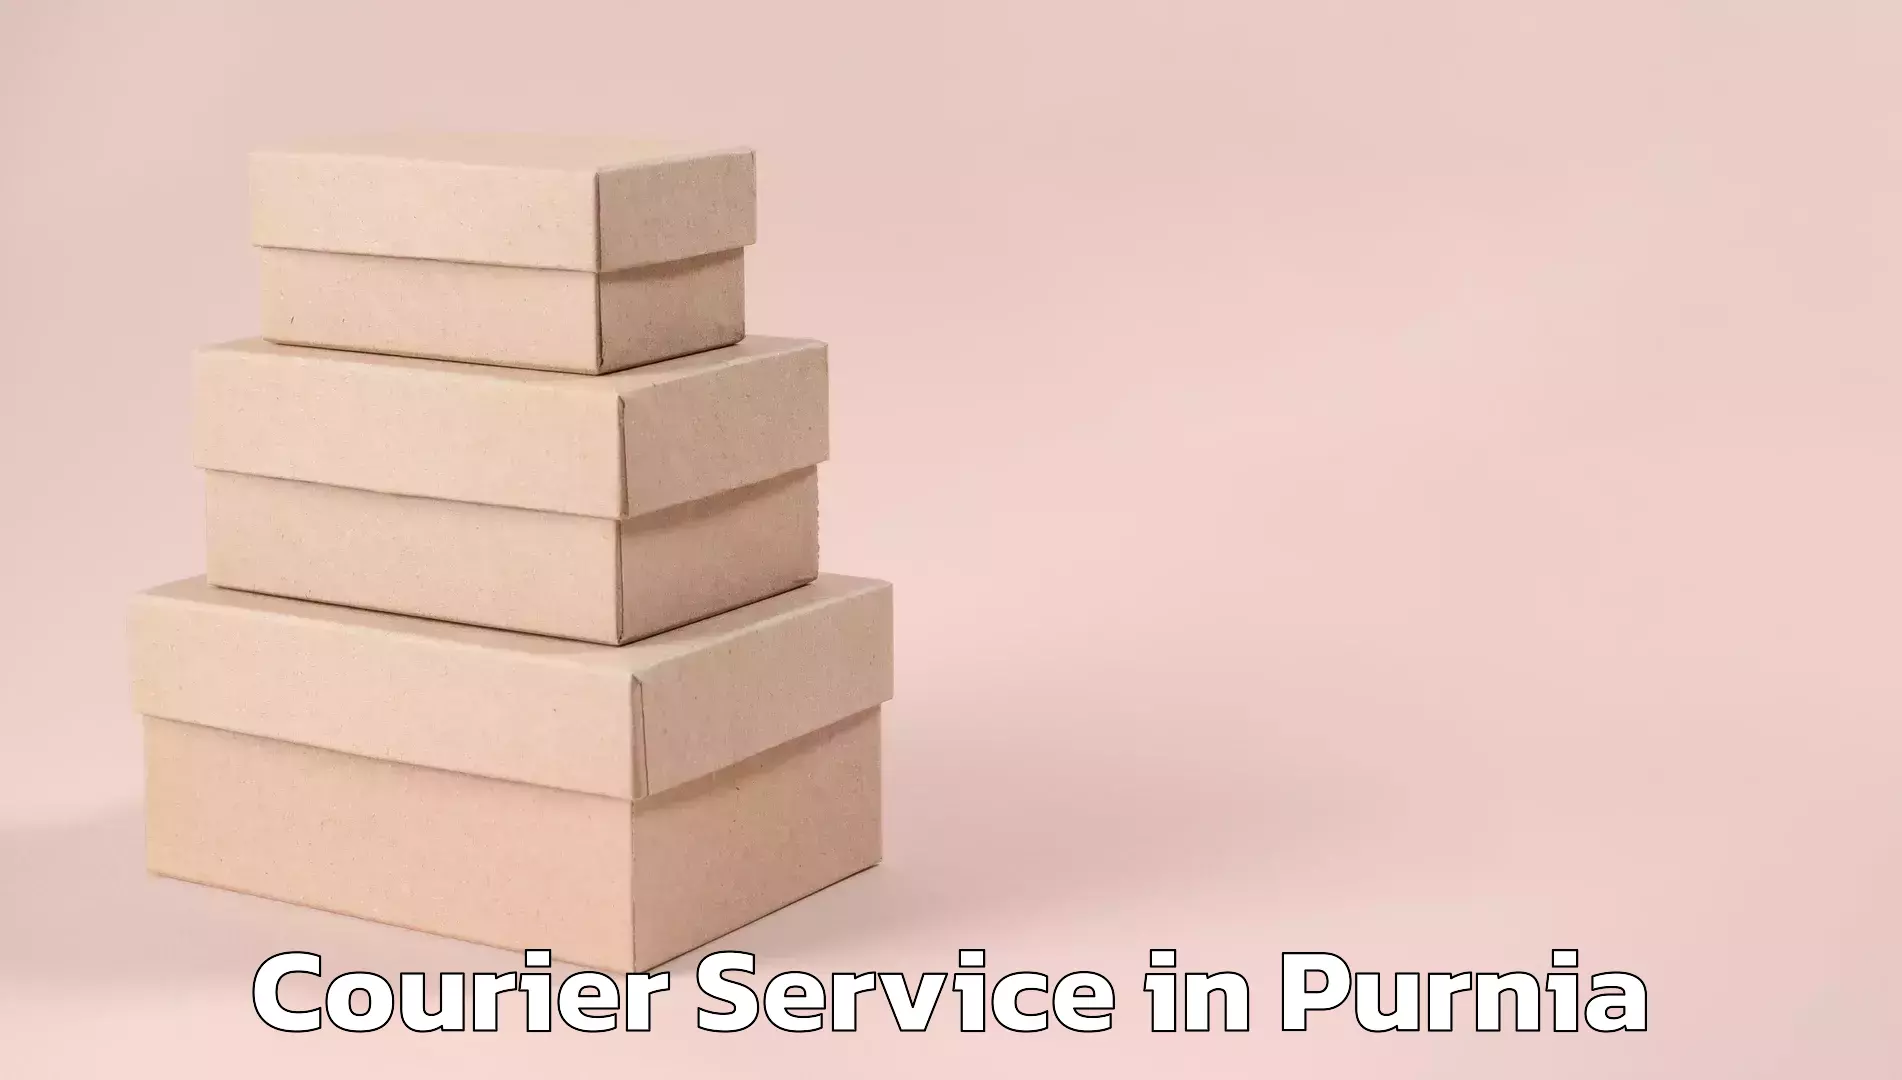 Lightweight parcel options in Purnia